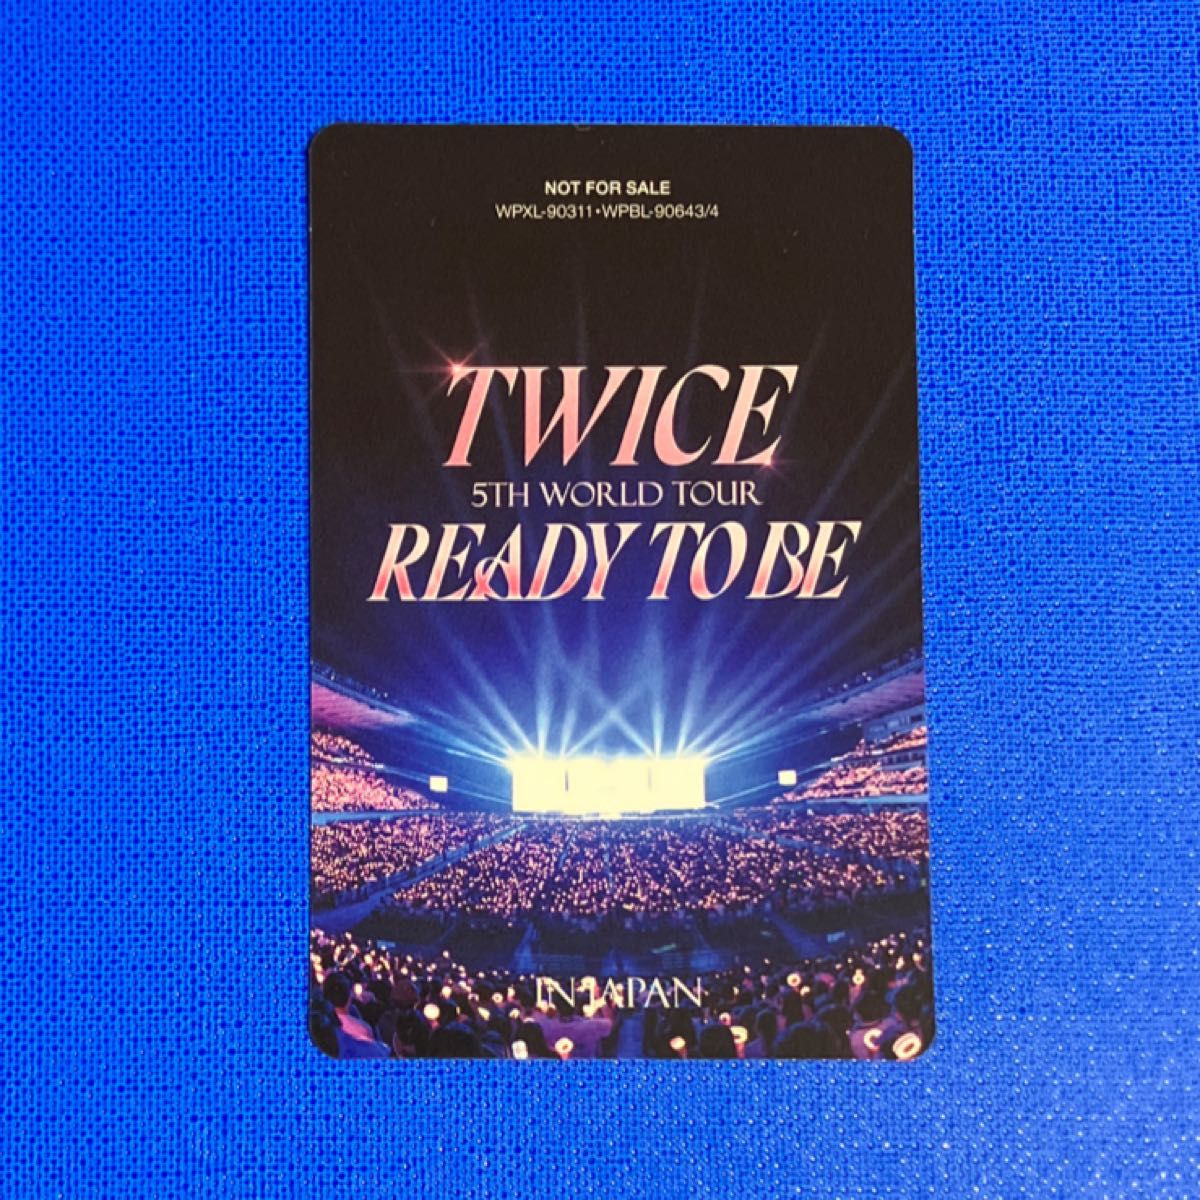 TWICE 5TH WORLD TOUR 'READY TO BE DVD BluRay 初回限定盤 ナヨン